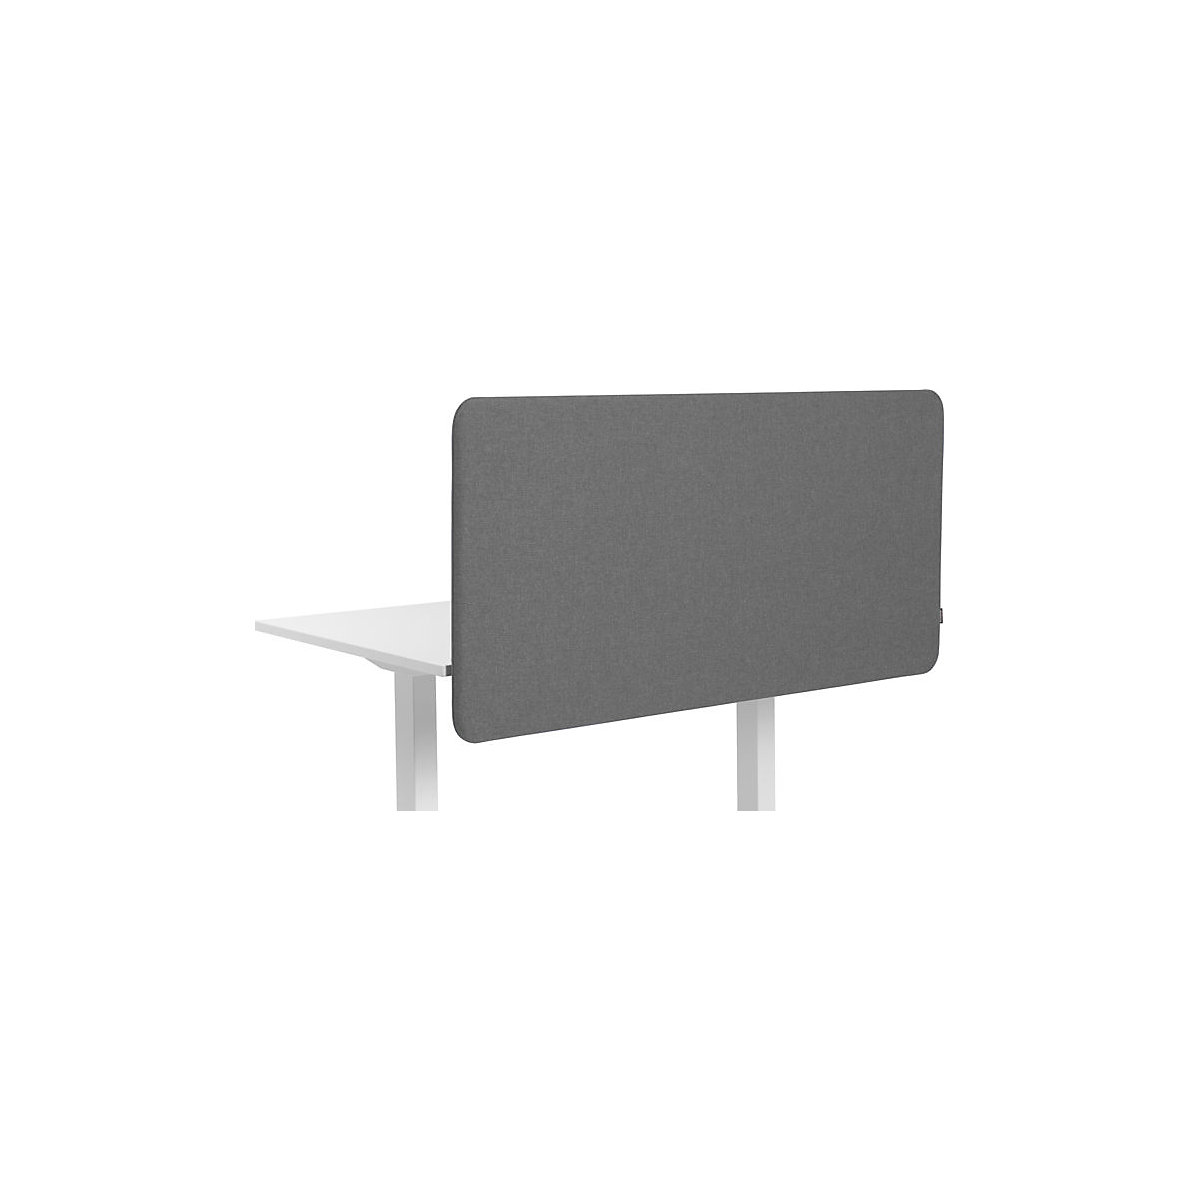 Softline Salsa acoustic desk partition, suspended downwards, HxW 650 x 1400 mm, fabric, grey-4